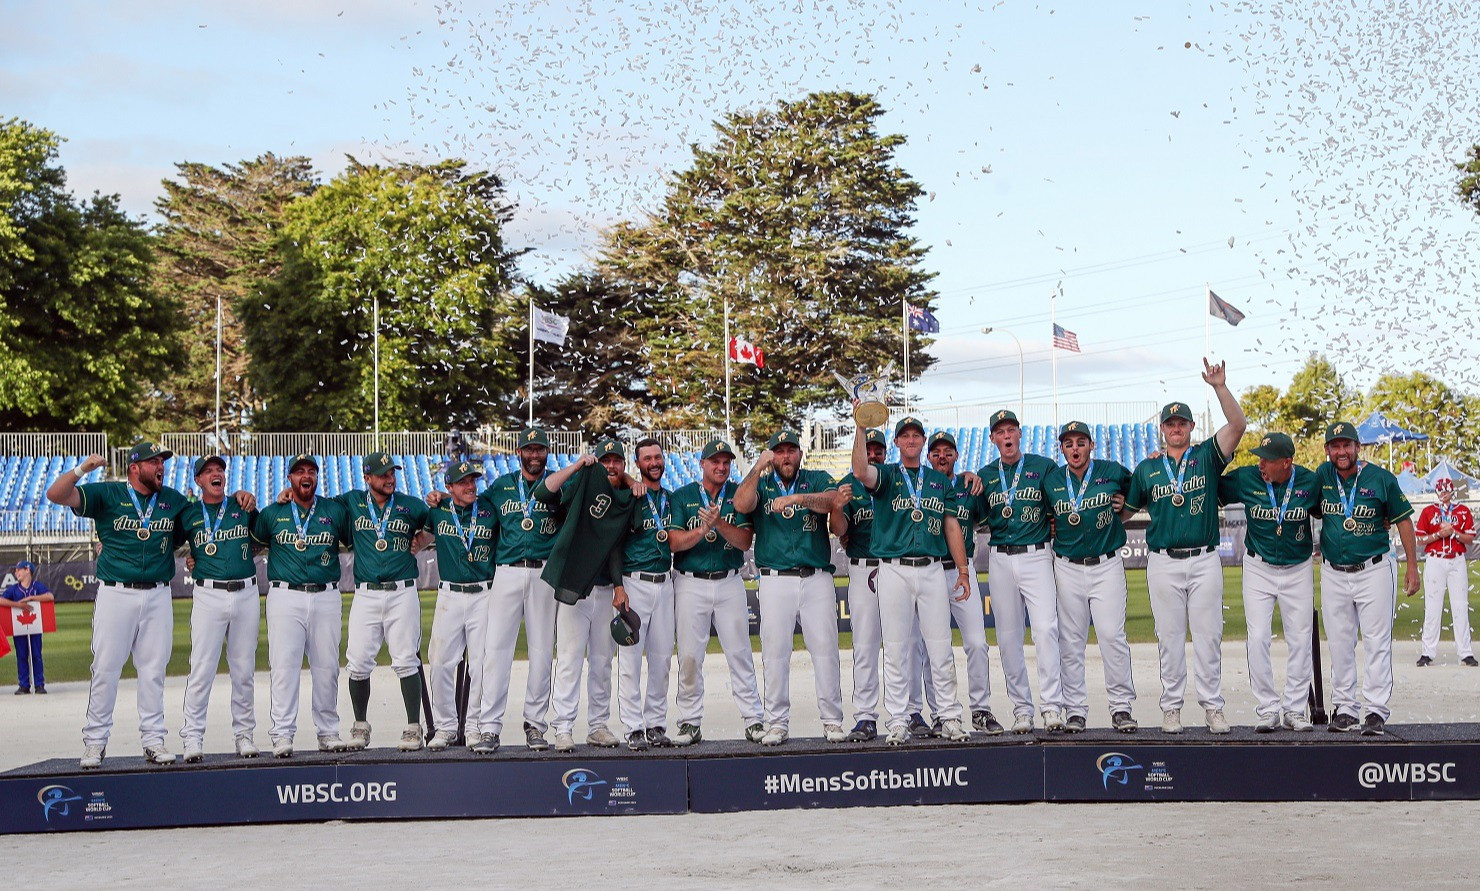 Australia beat Canada in the final to clinch Men's Softball World Cup gold ©WBSC